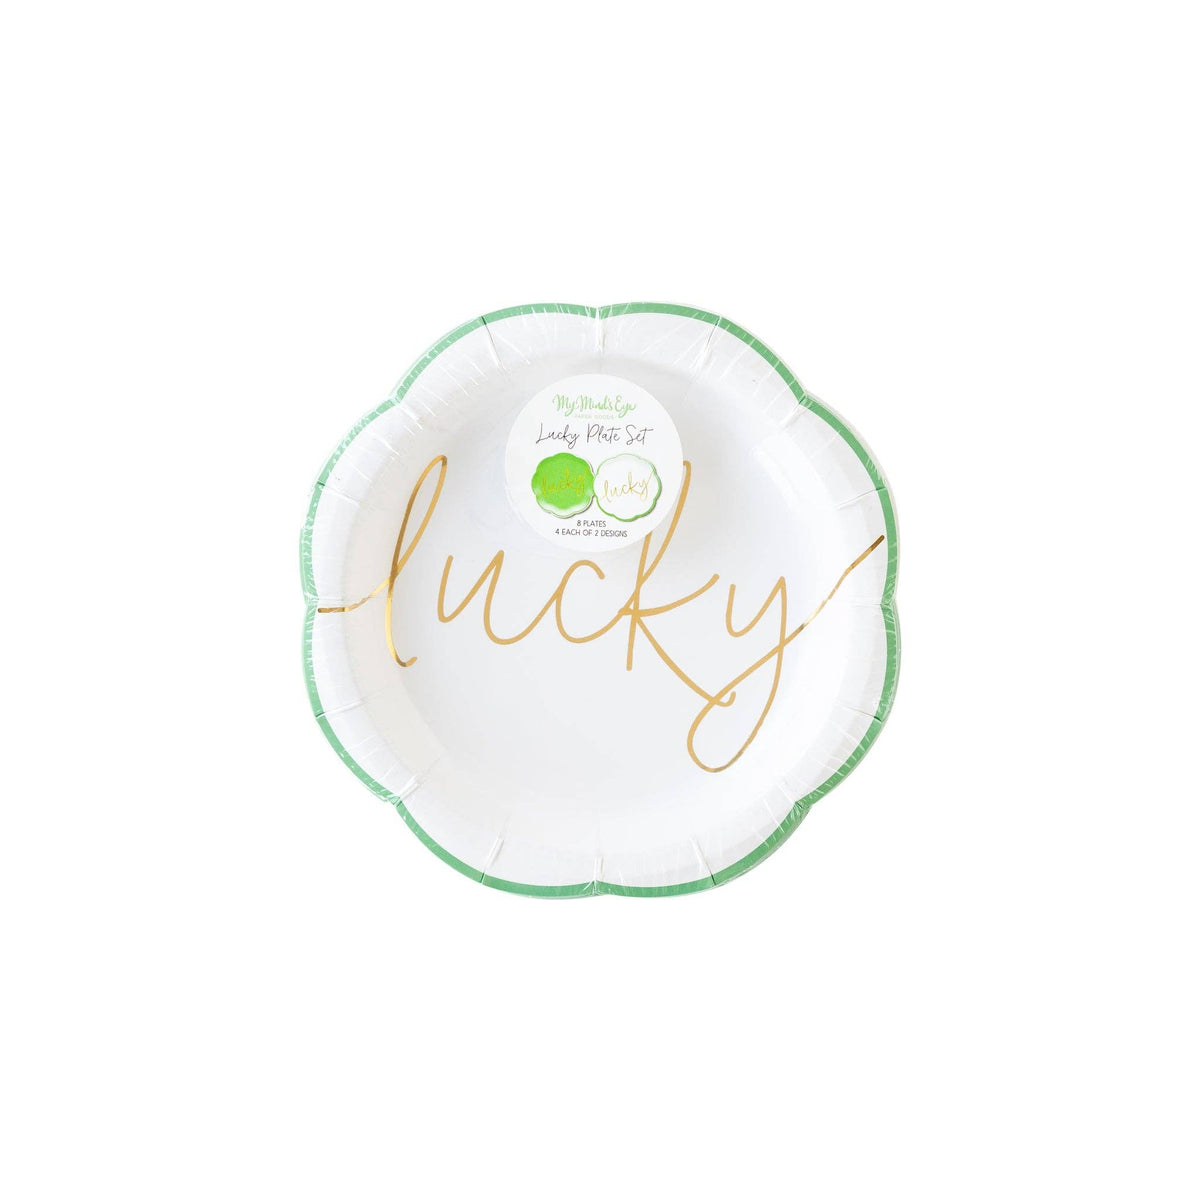 Lucky Paper Plate Set - The Preppy Bunny